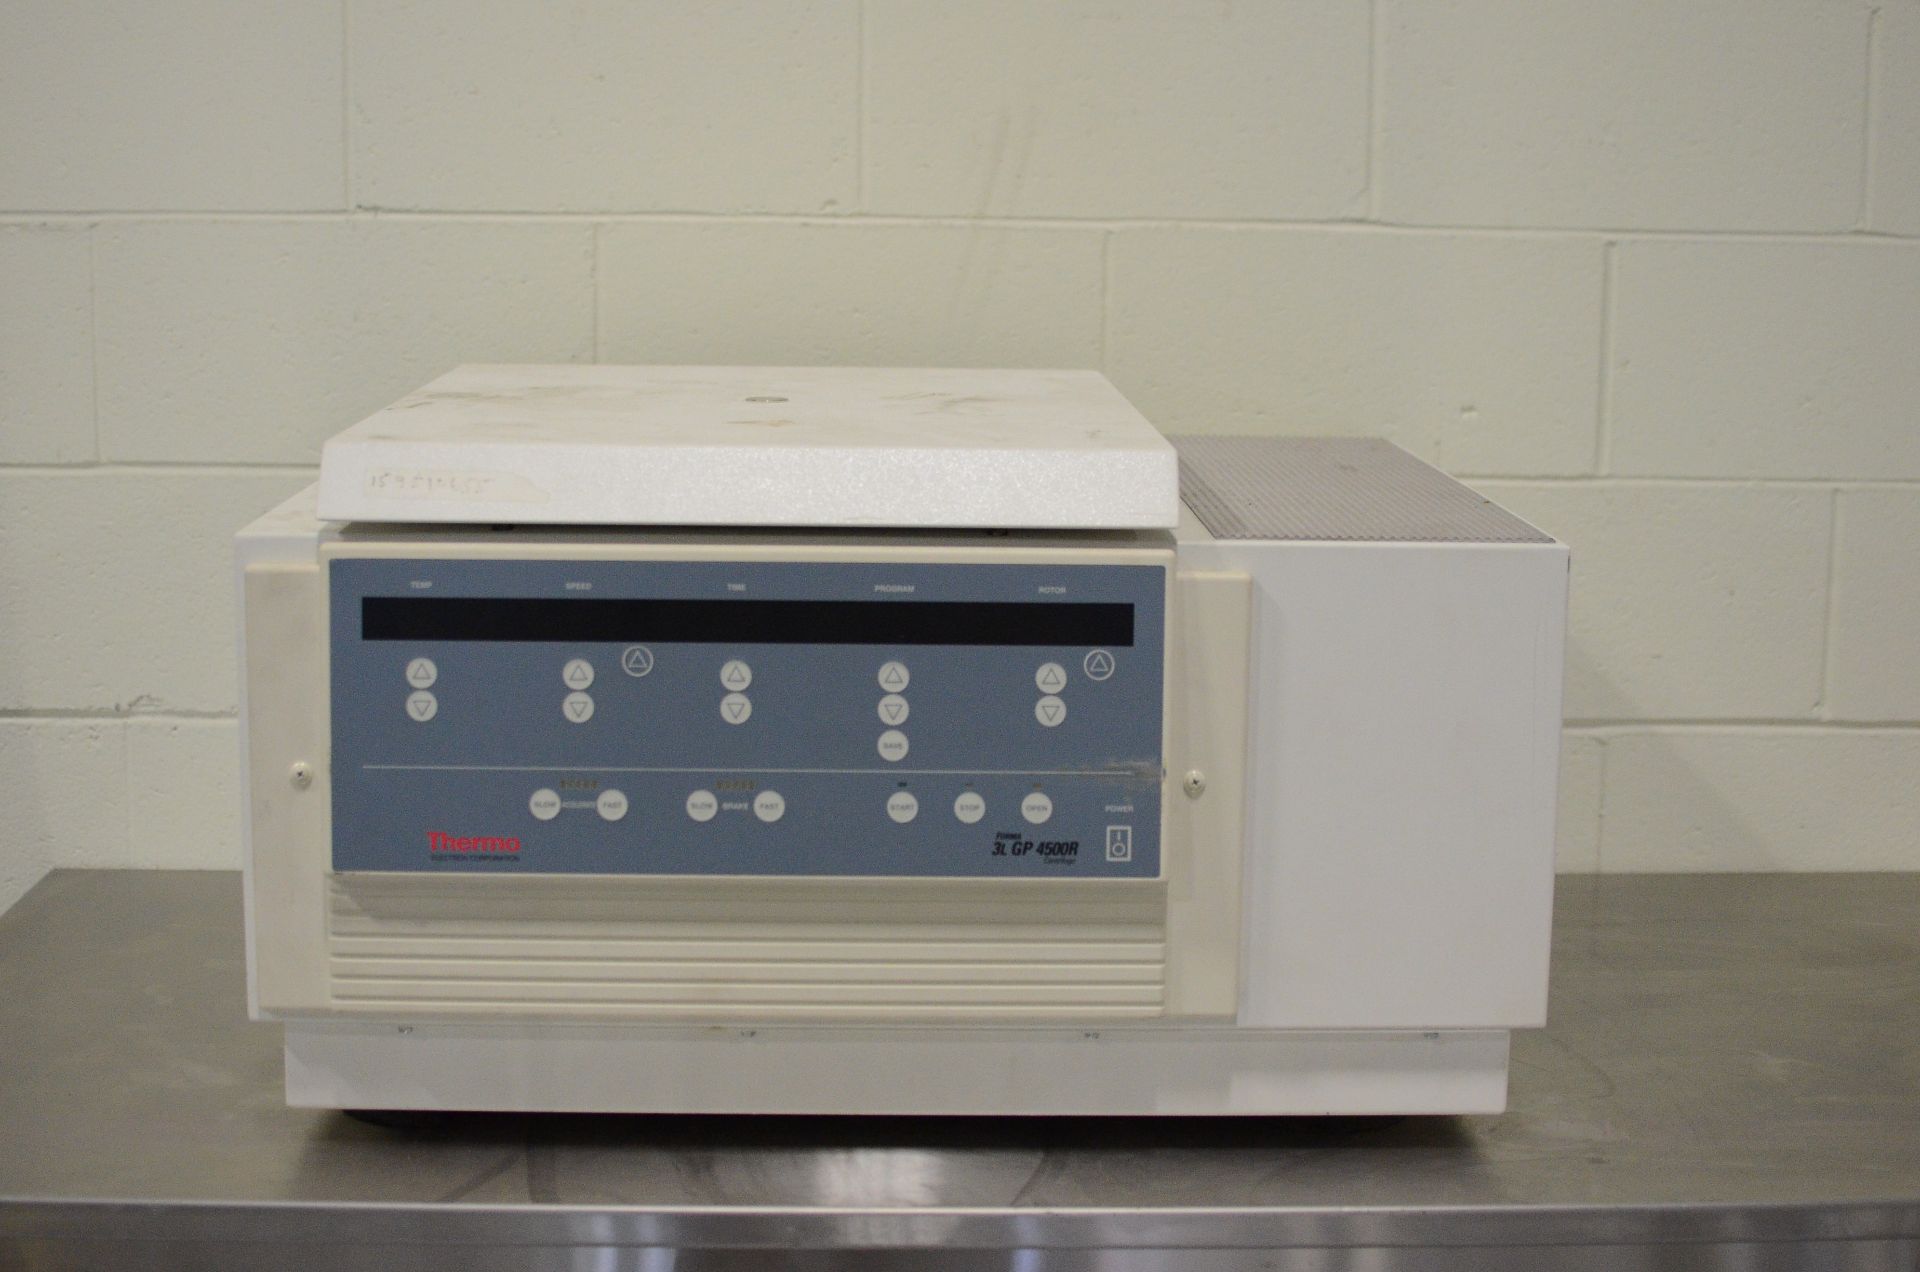 Thermo Electron Corp 4500R Forma centrifuge, model: 5682 3L GP, s/n: 159510655, 120v, 12 amps, 60hz,